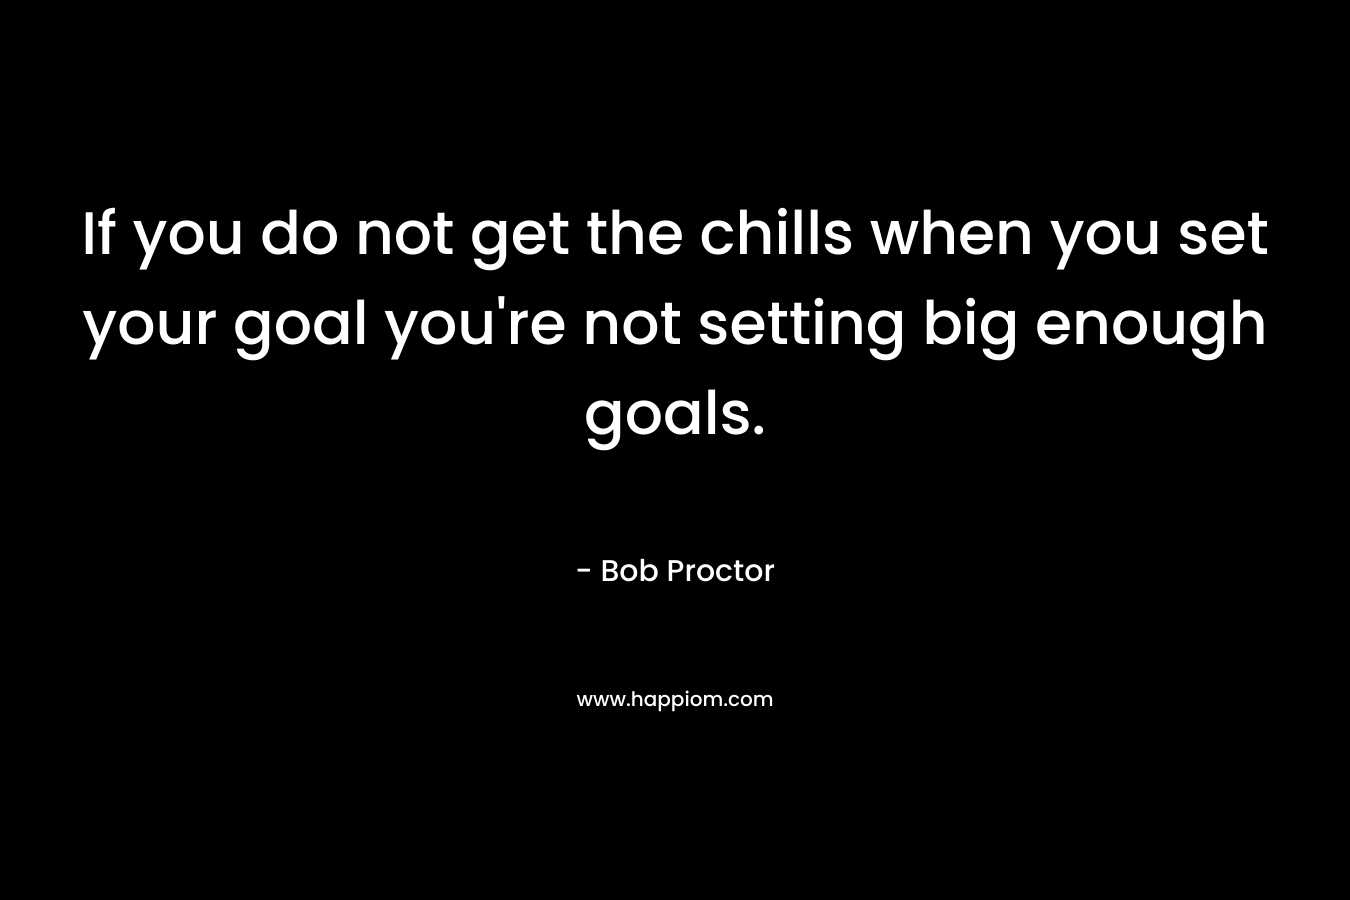 If you do not get the chills when you set your goal you’re not setting big enough goals. – Bob Proctor